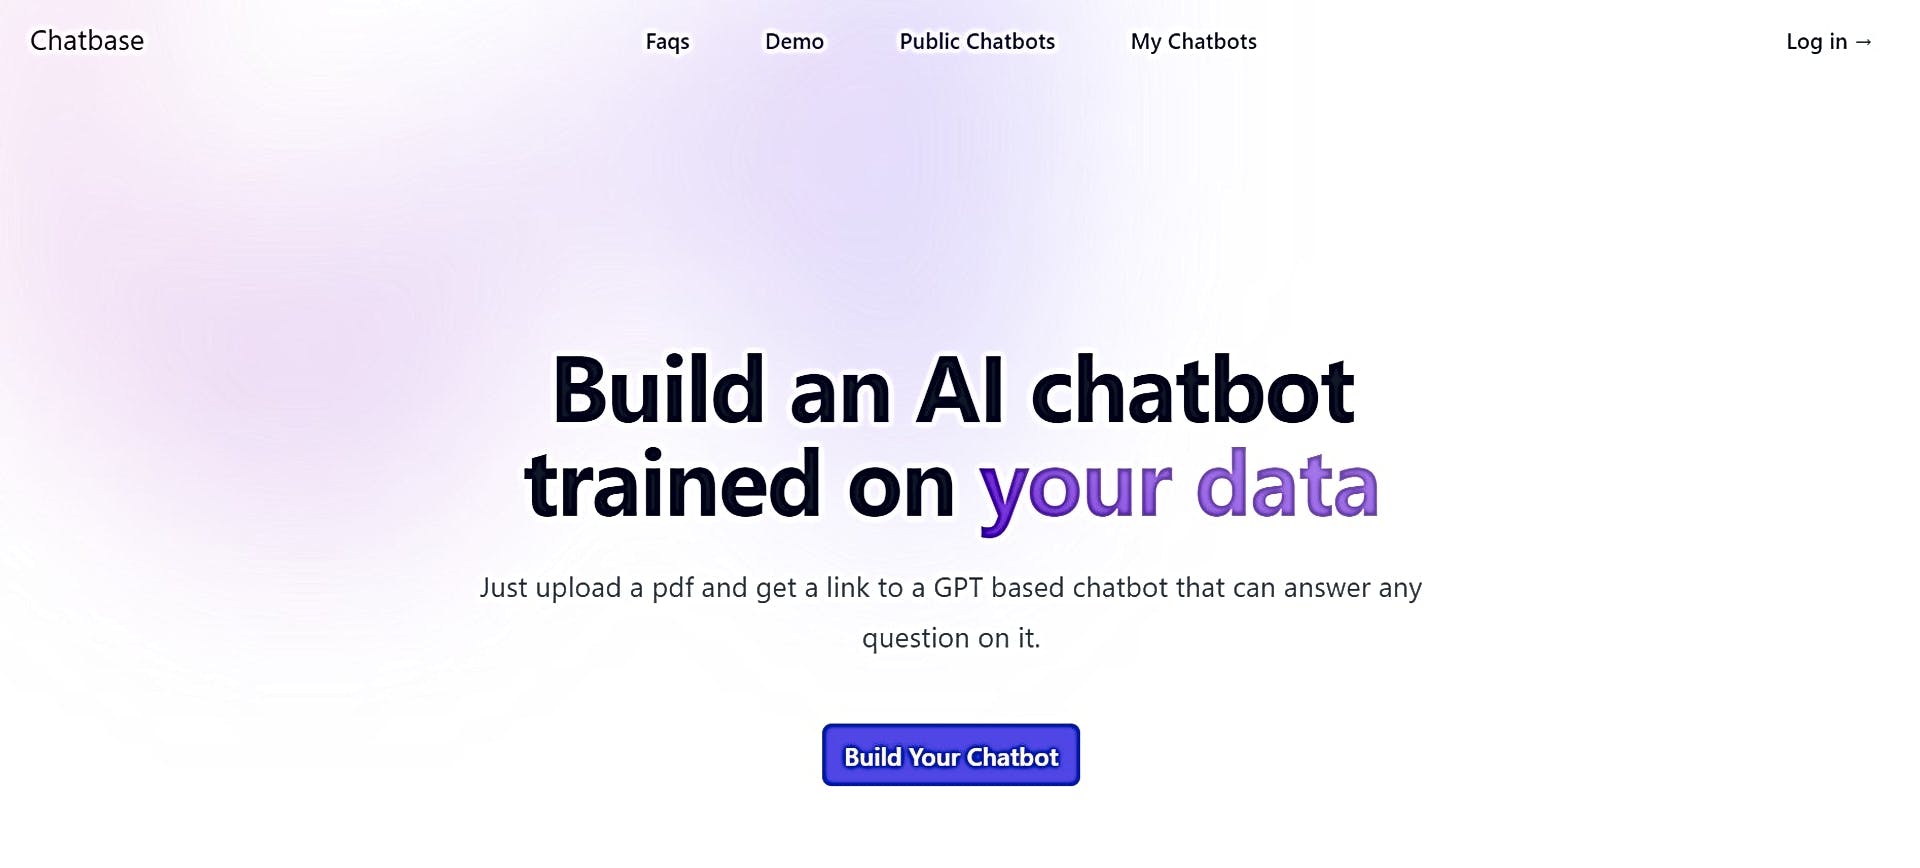 Chatbase featured